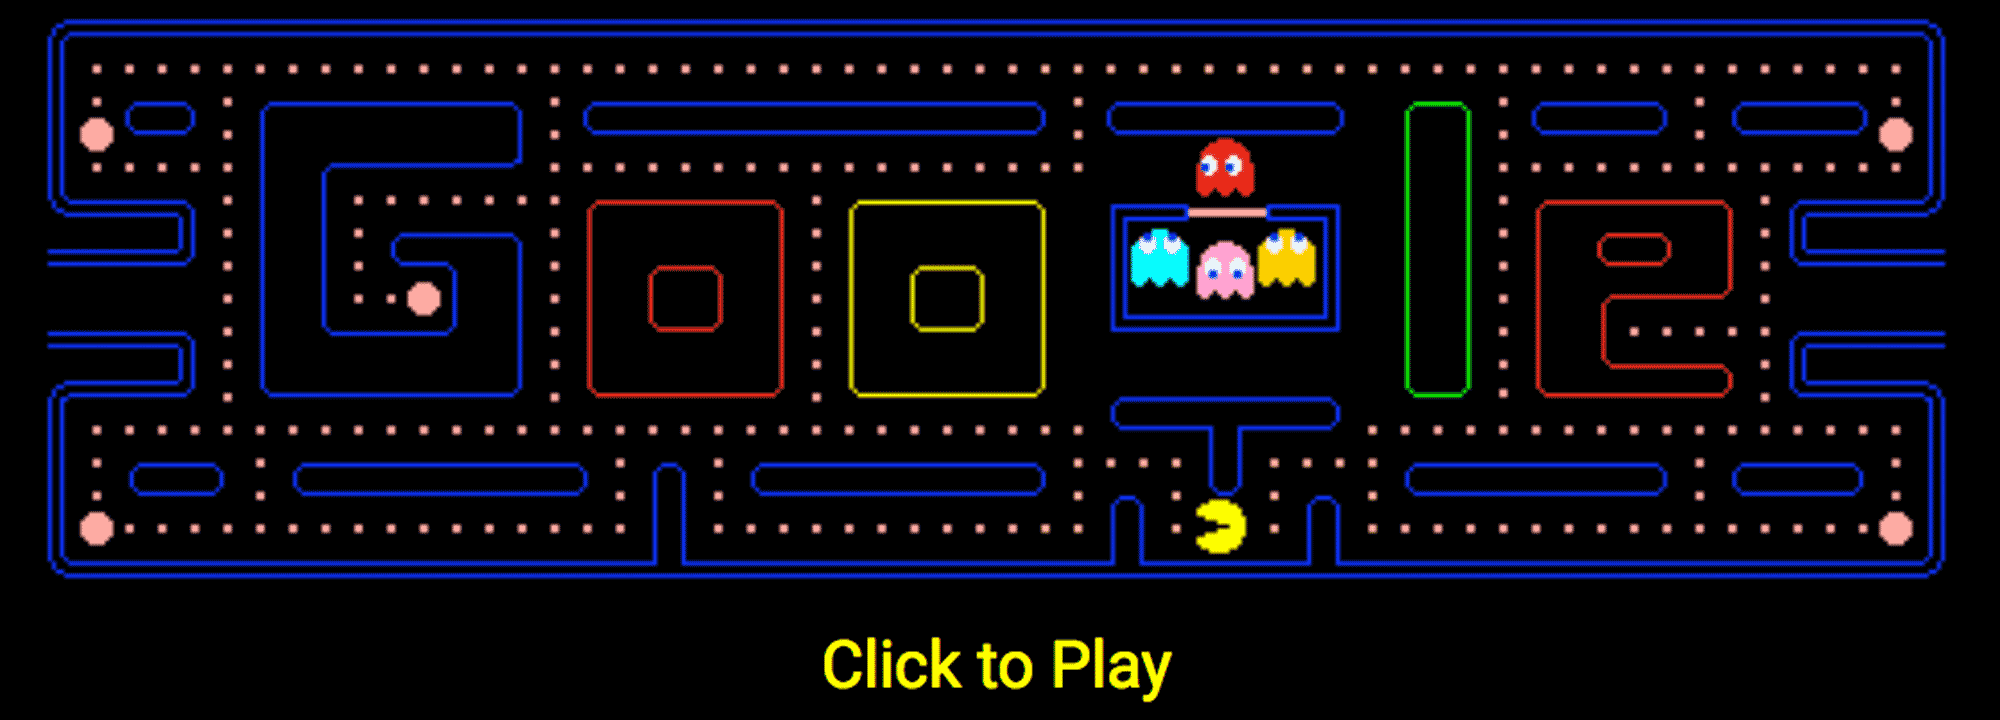 Video Game Hall of Fame Welcomes Pac-Man